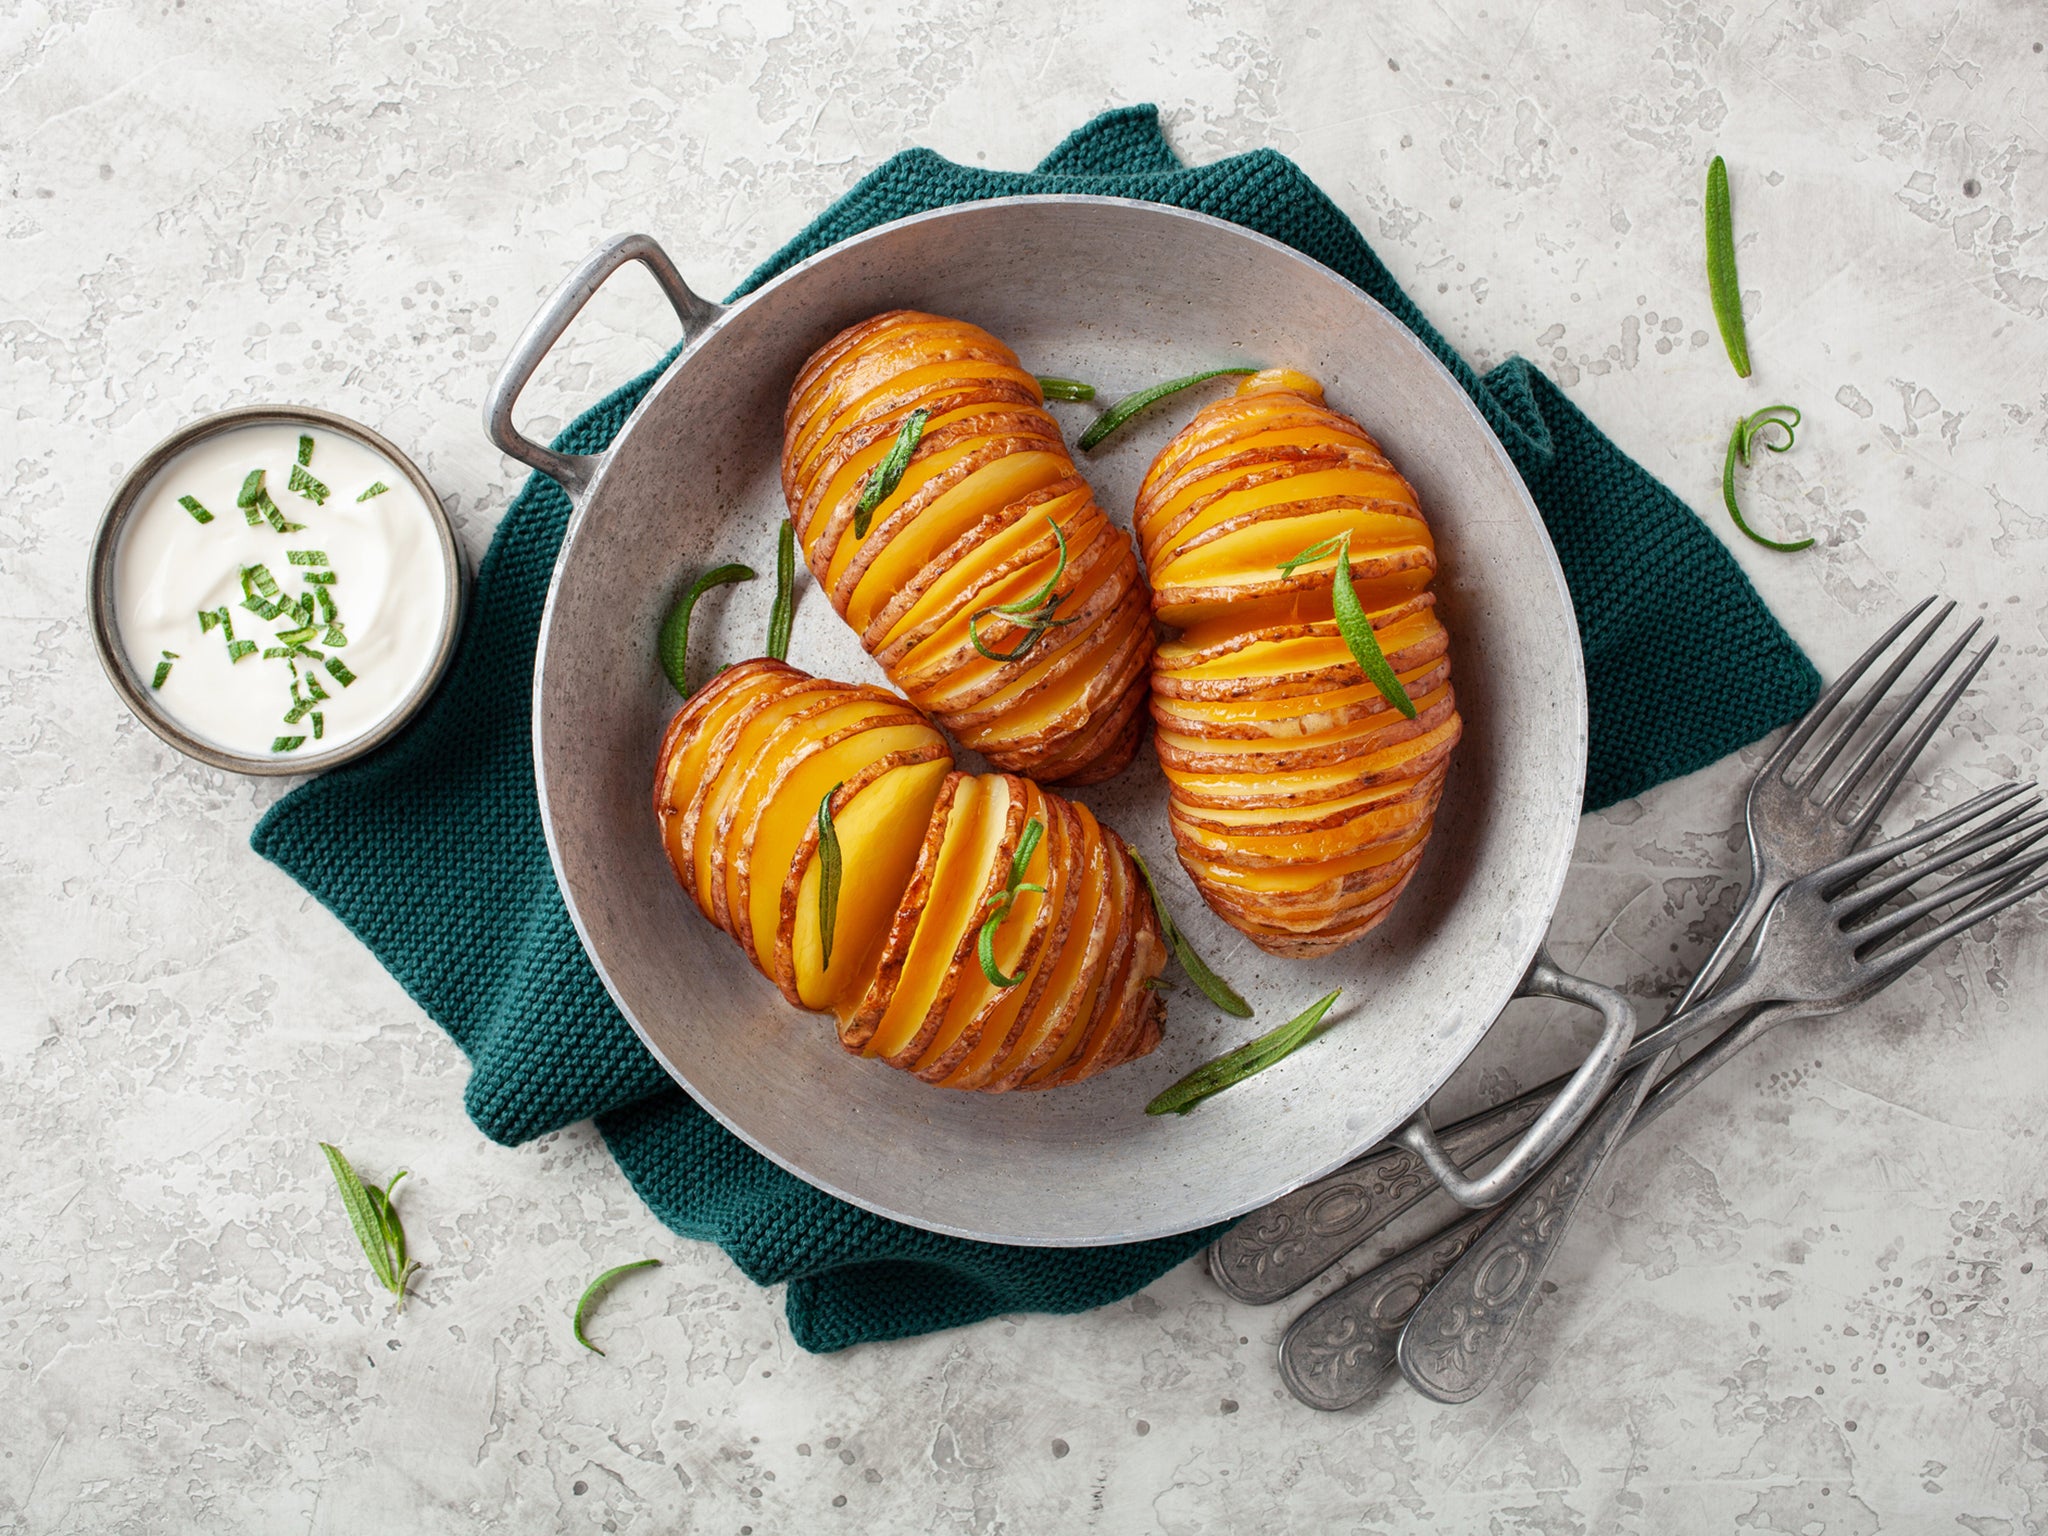 Perfectly crispy hasselback potatoes made in the air fryer and seasoned to perfection